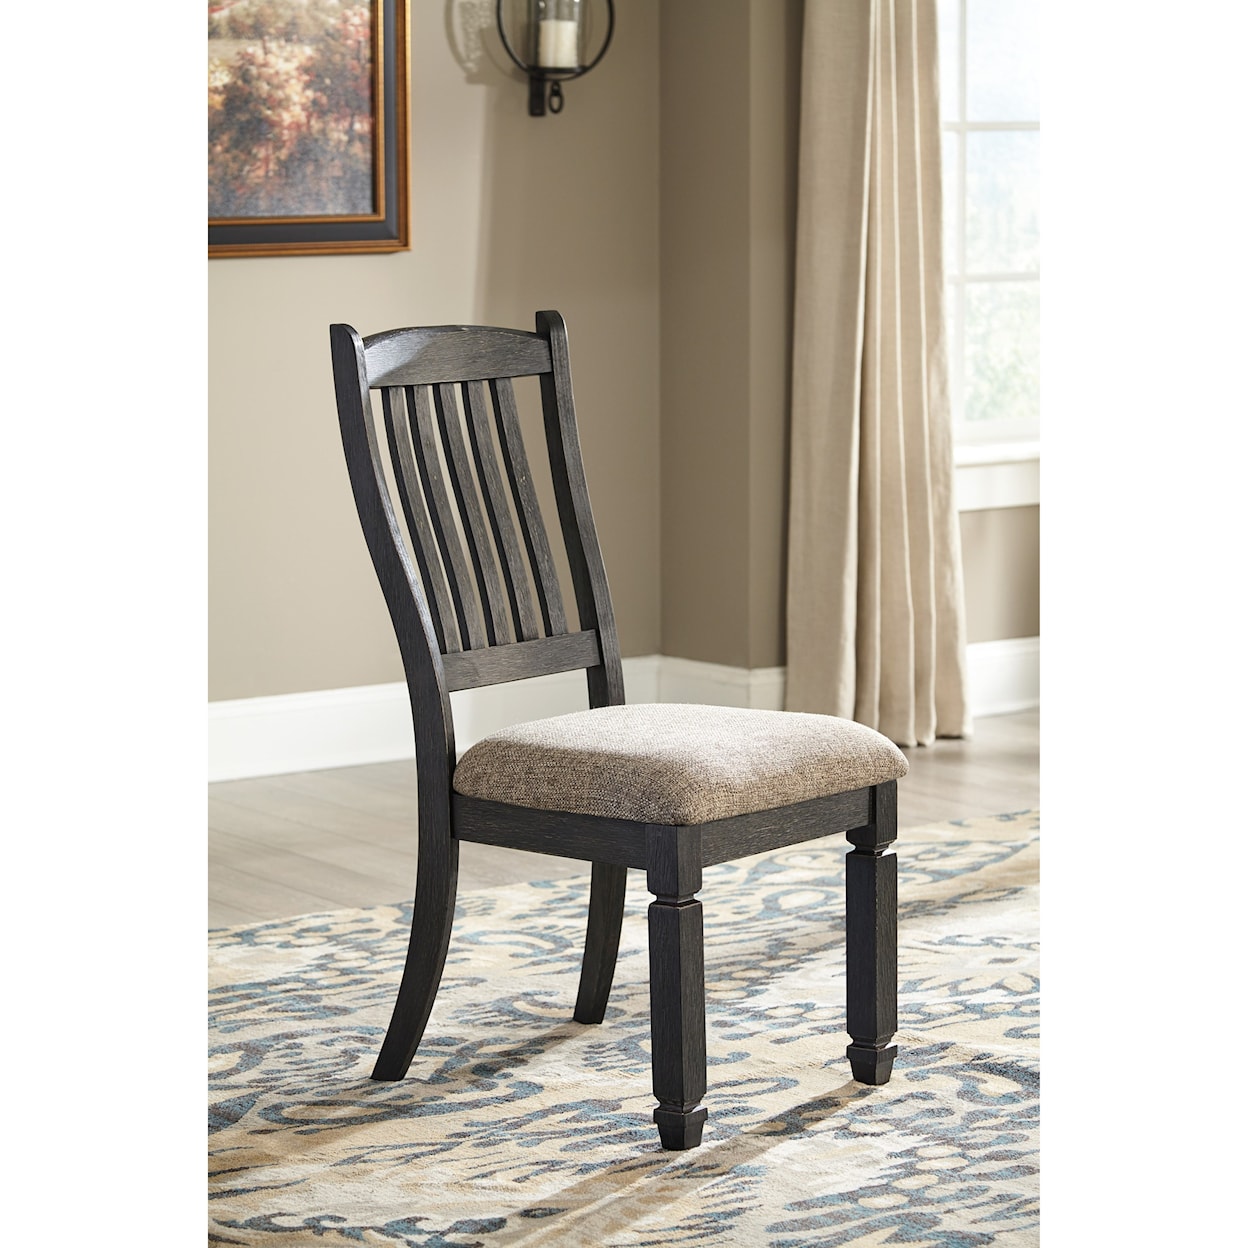 Signature Design by Ashley Tyler Creek Table and Chair Set with Bench